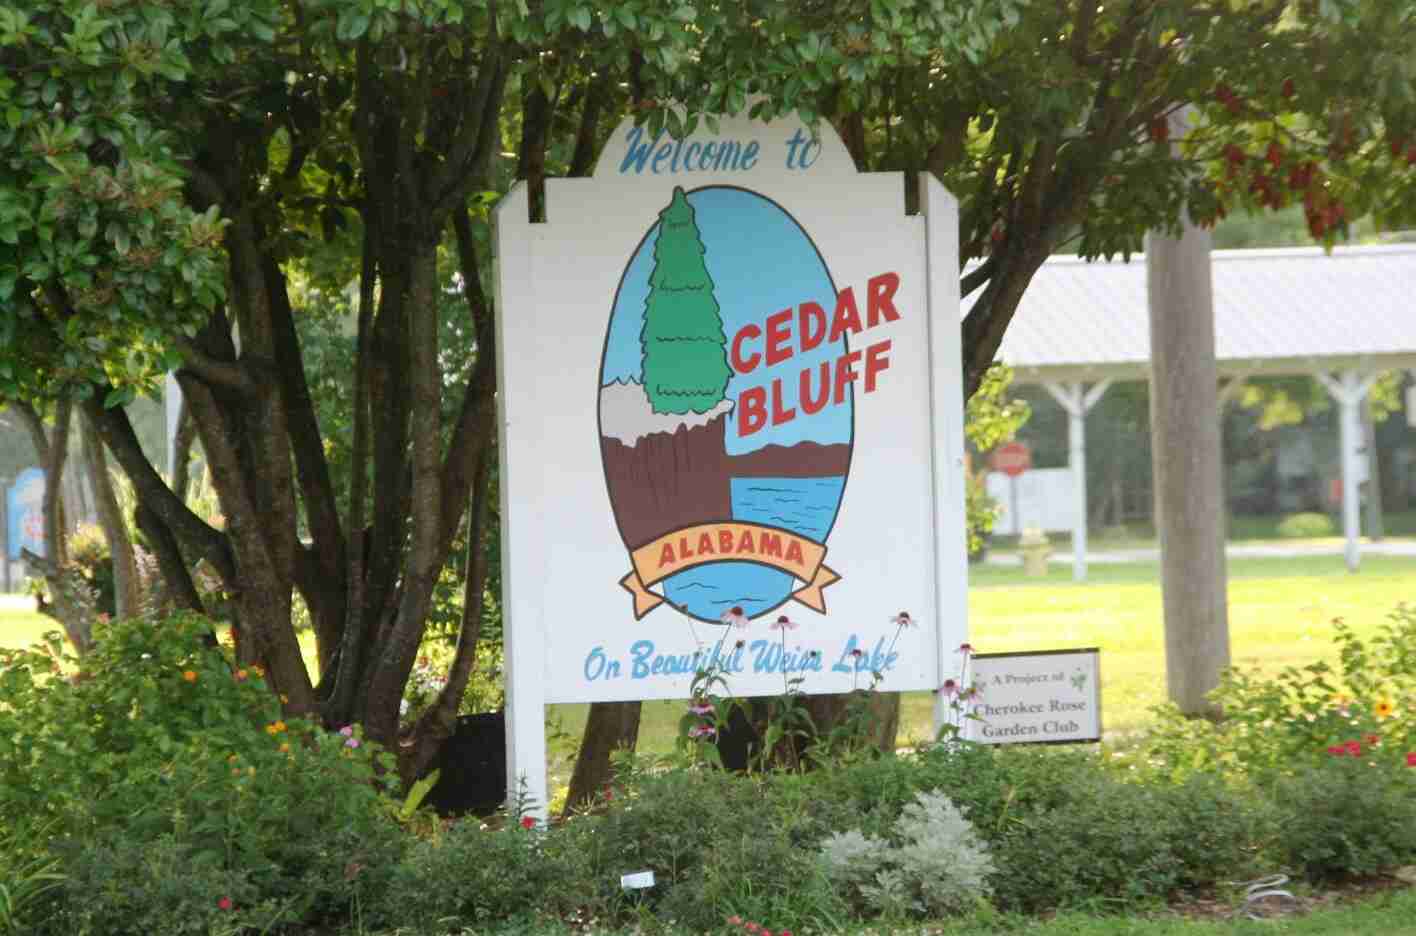 Second Special Called Cedar Bluff Town Council Meeting For 3:30 pm On Friday Again Postponed